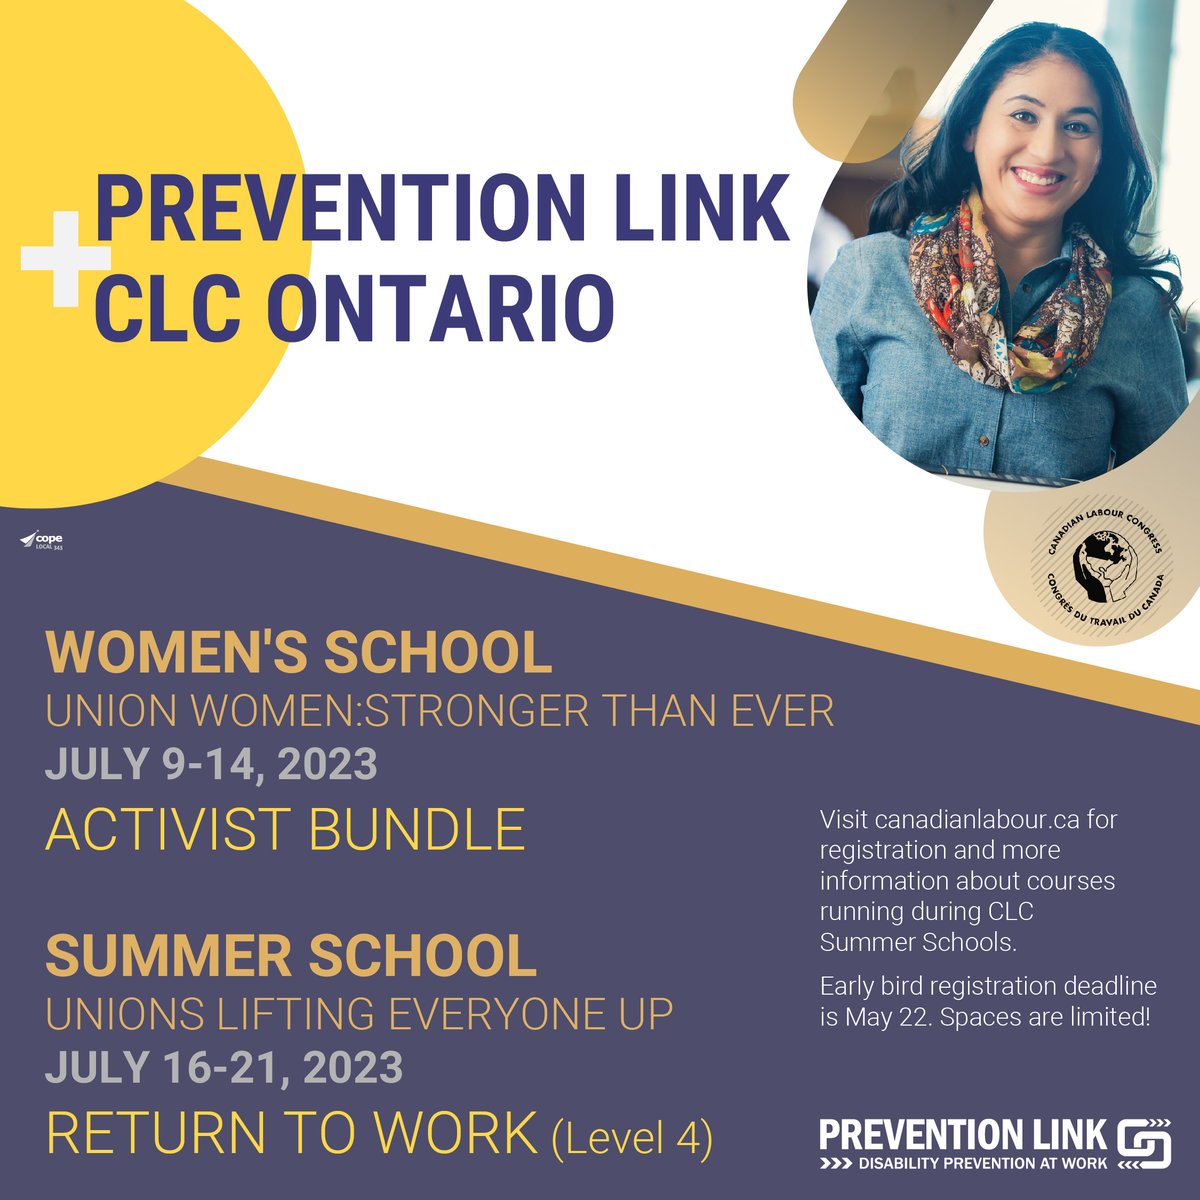 Prevention Link proudly joins the @CanadianLabour  for its Summer Schools. To register and for more information about the school  canadianlabour.ca/events/

#onlab #WorkersComp #WorkersCompensation #ReturnToWork #DutyToAccommodate #wsib